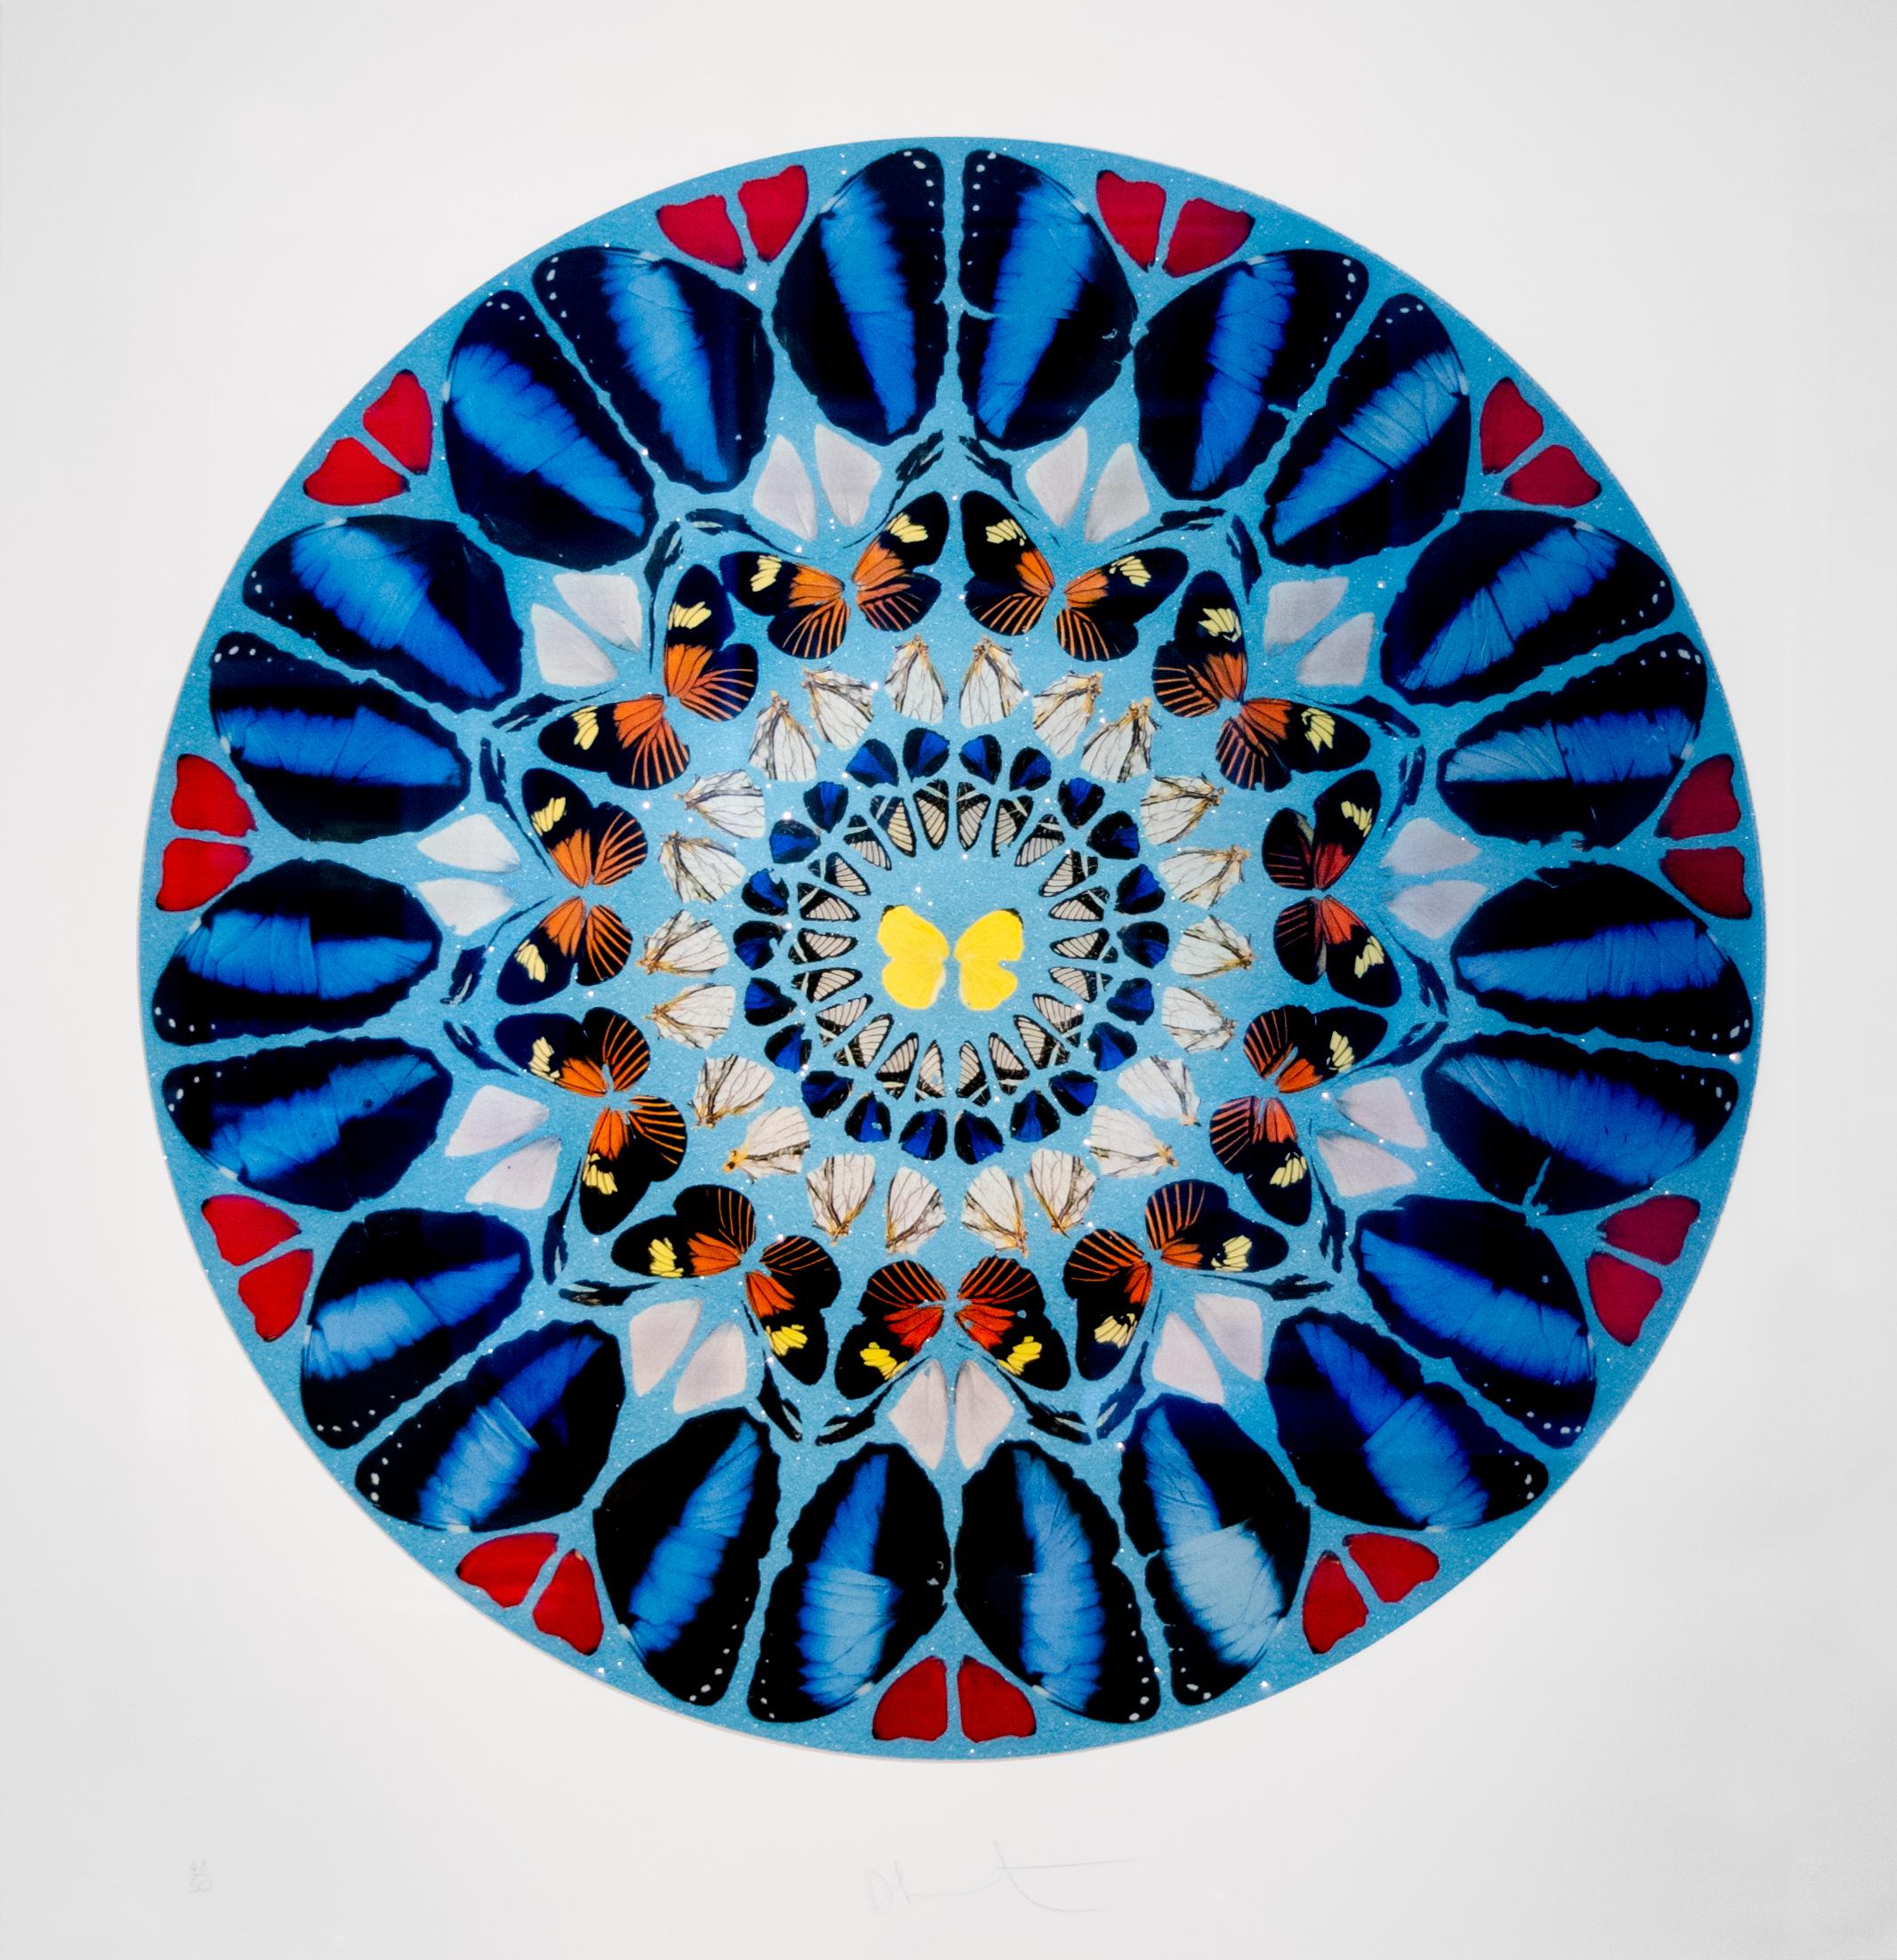 Ad te, Domine, Levavi, from Psalm Prints - Art by Damien Hirst